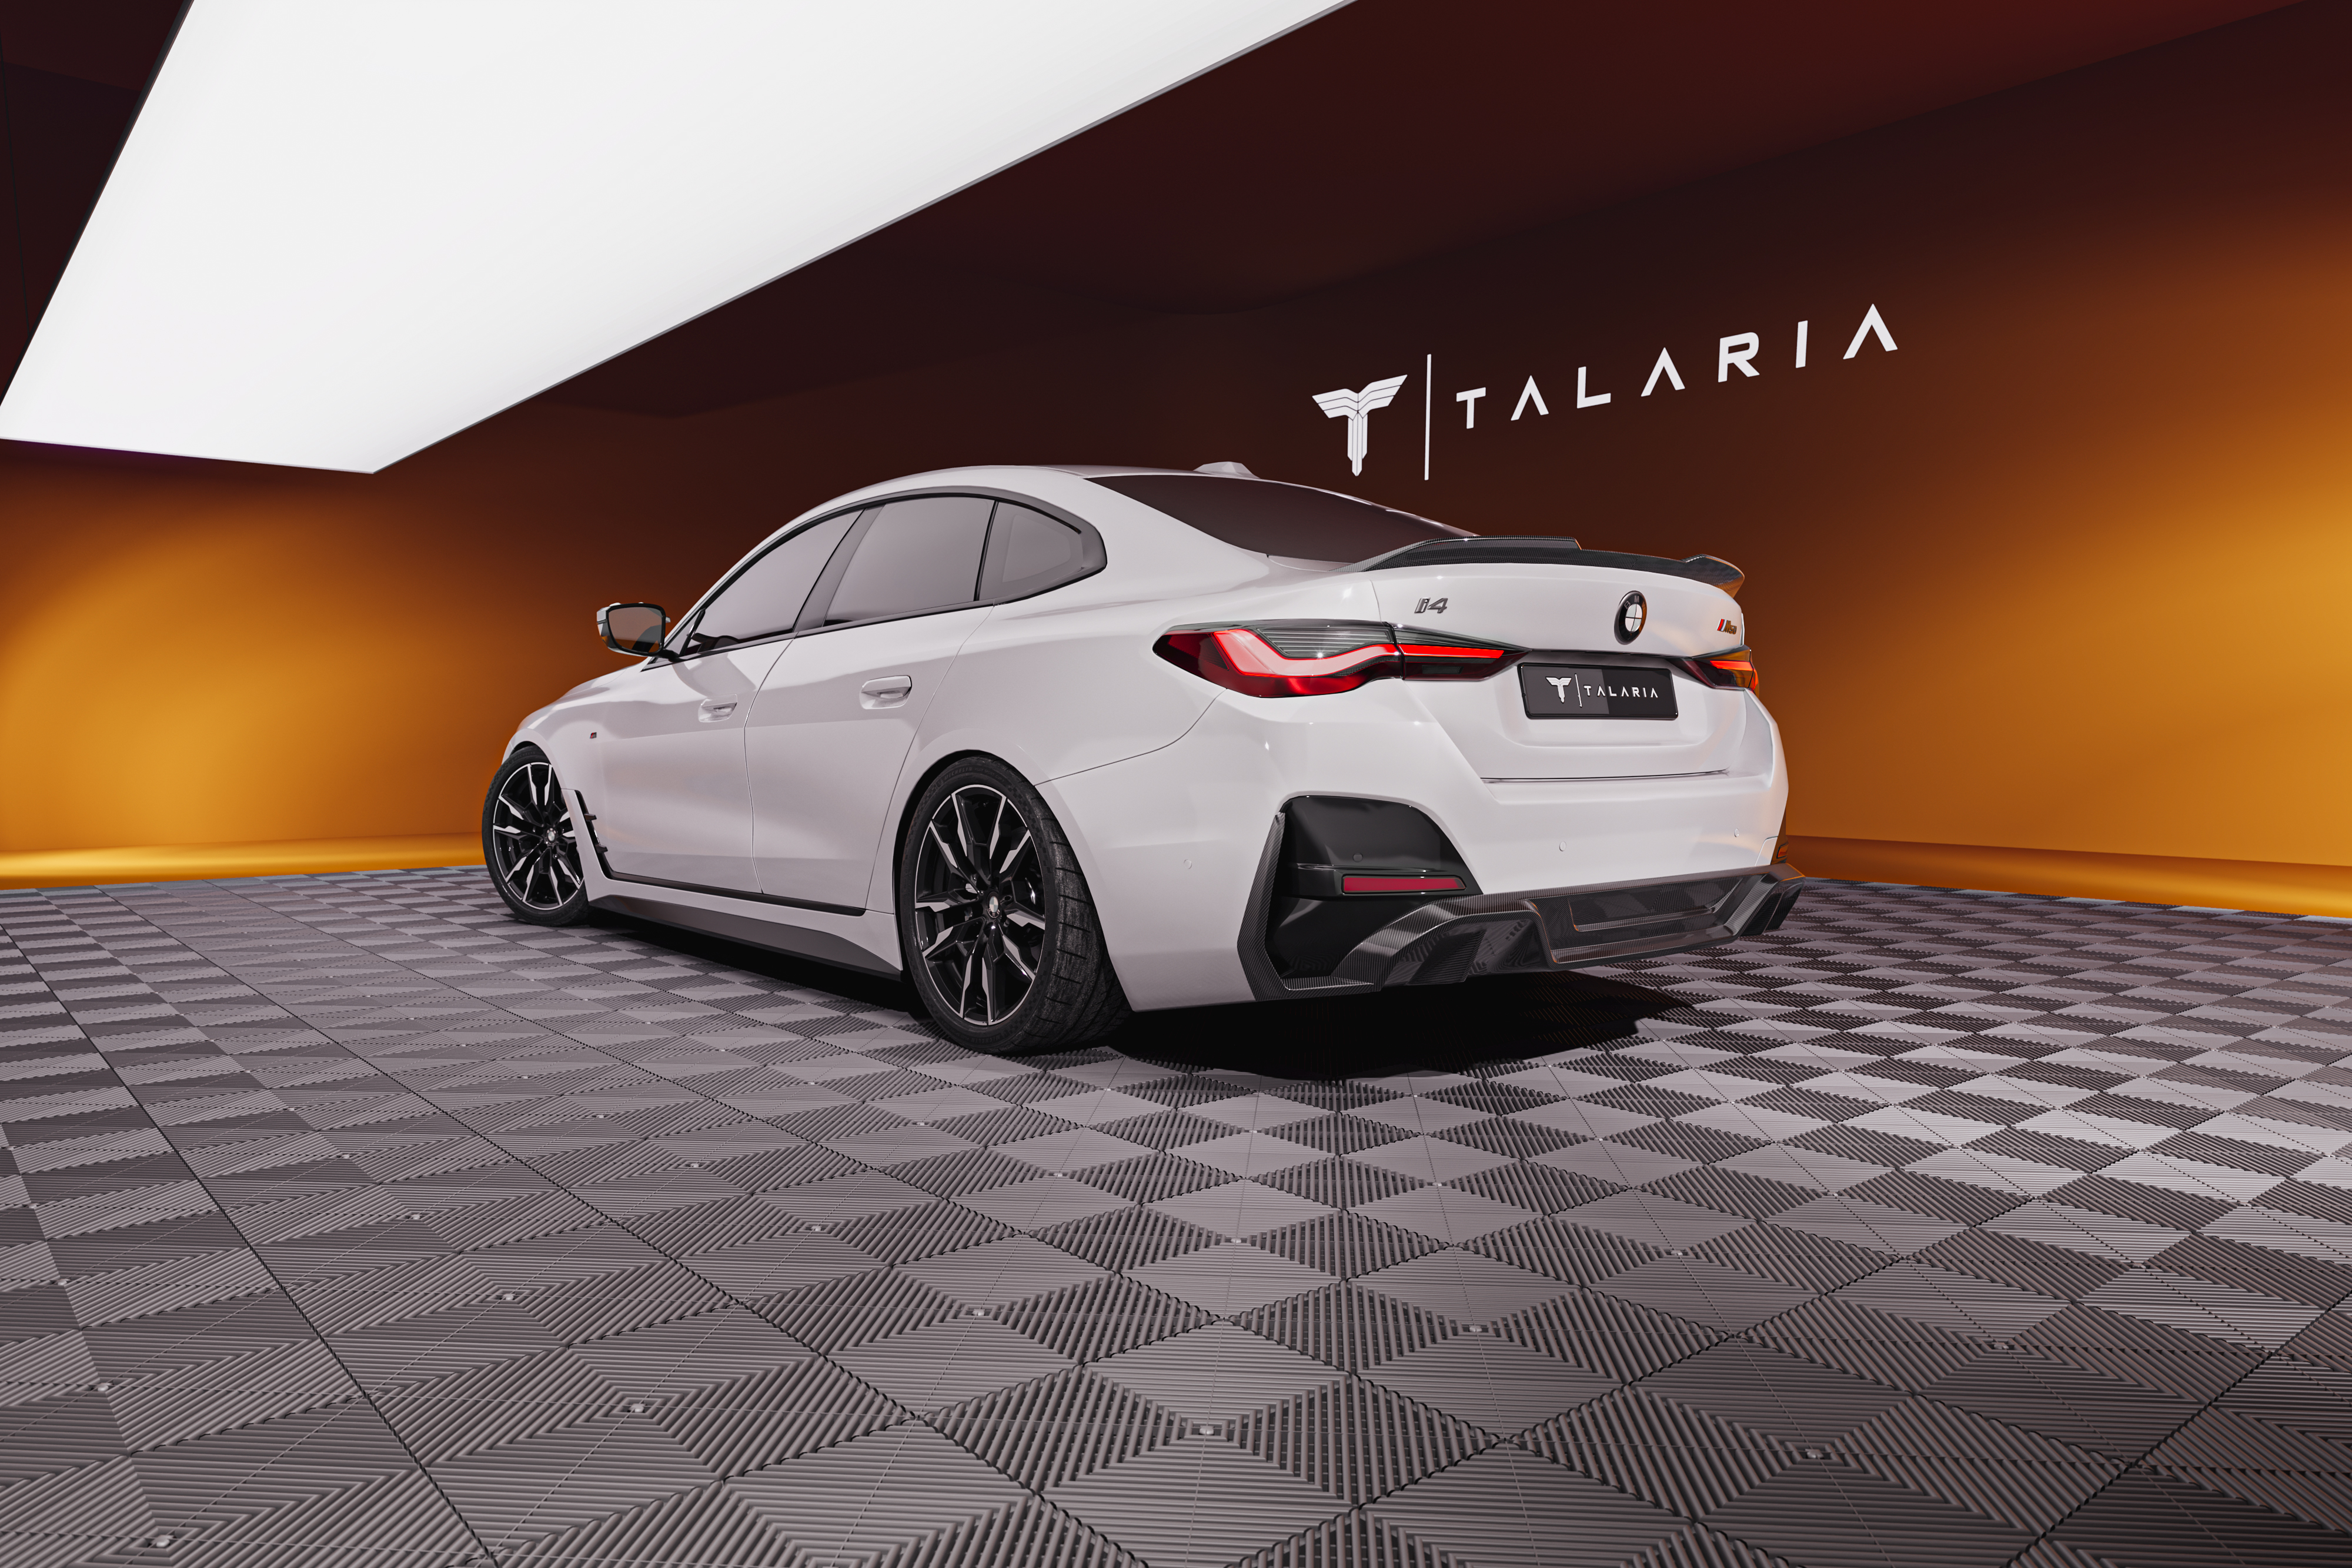 Check our price and buy Talaria Carbon Fiber Body kit set for BMW i4 M50